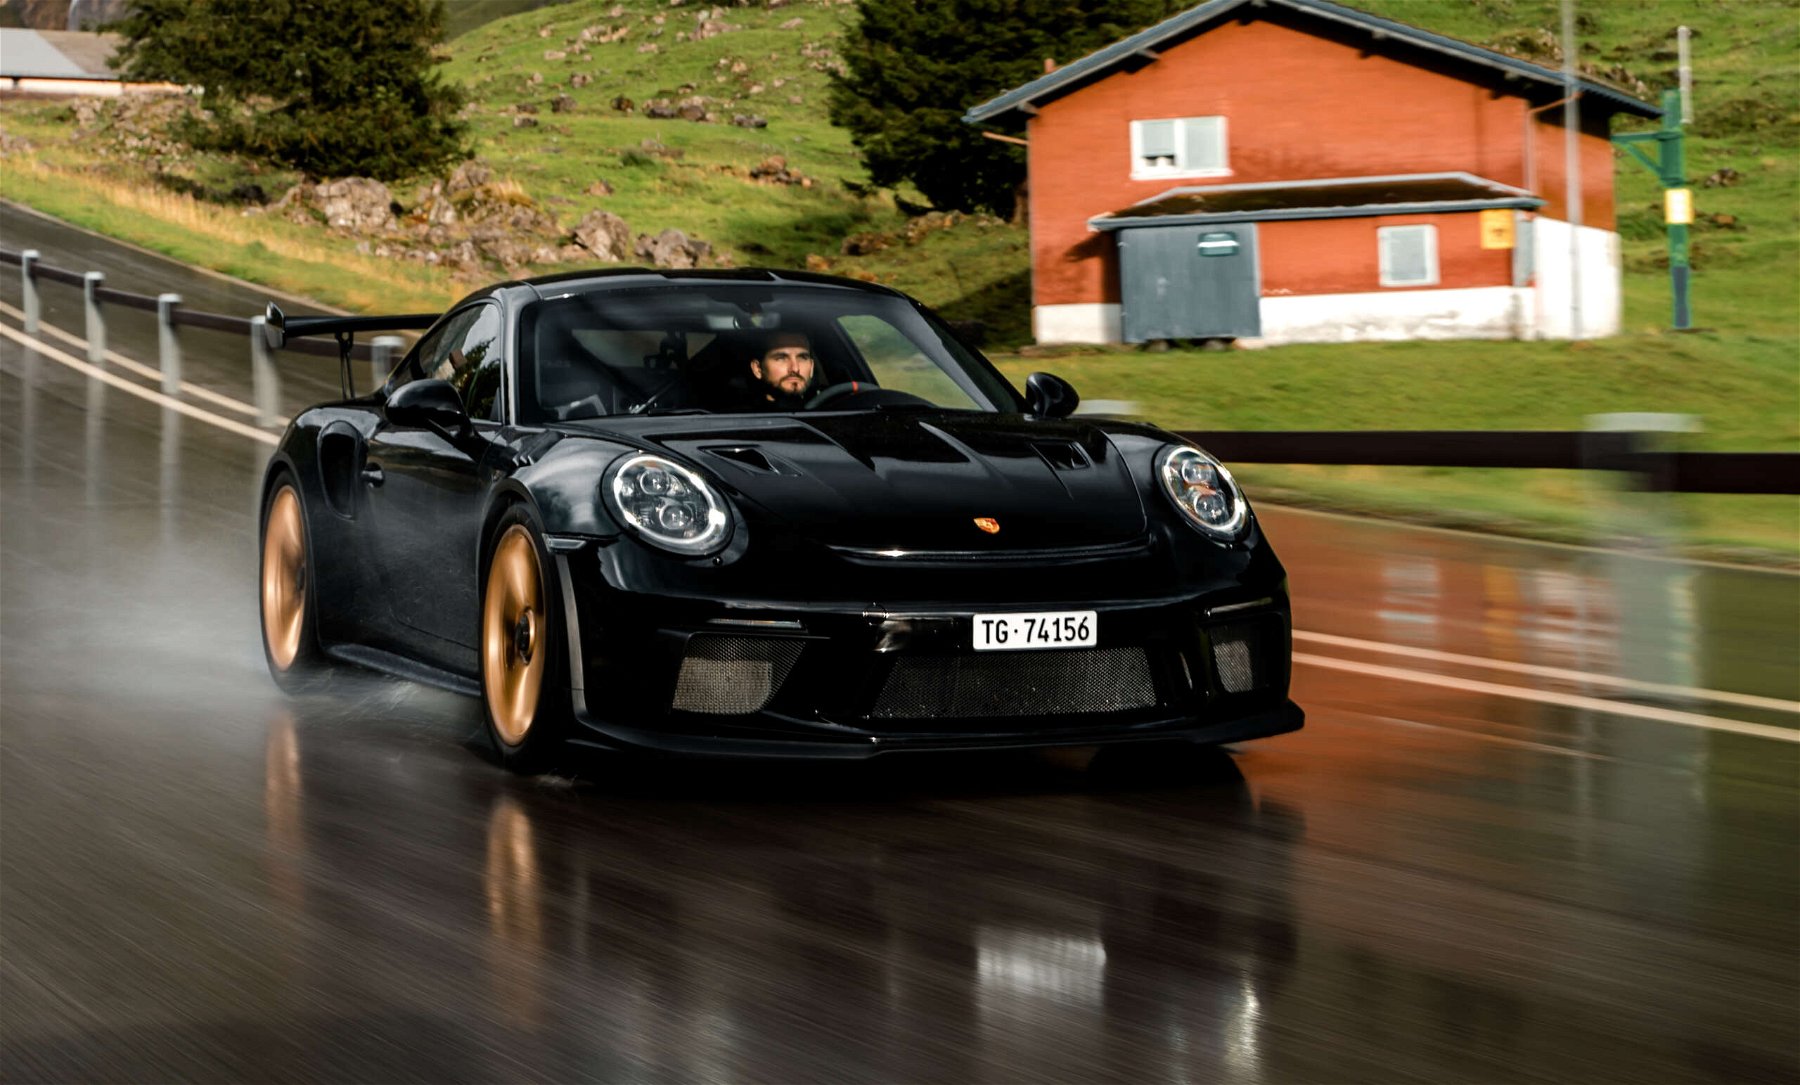 Tim and his <br /> Porsche 911 GT3 RS